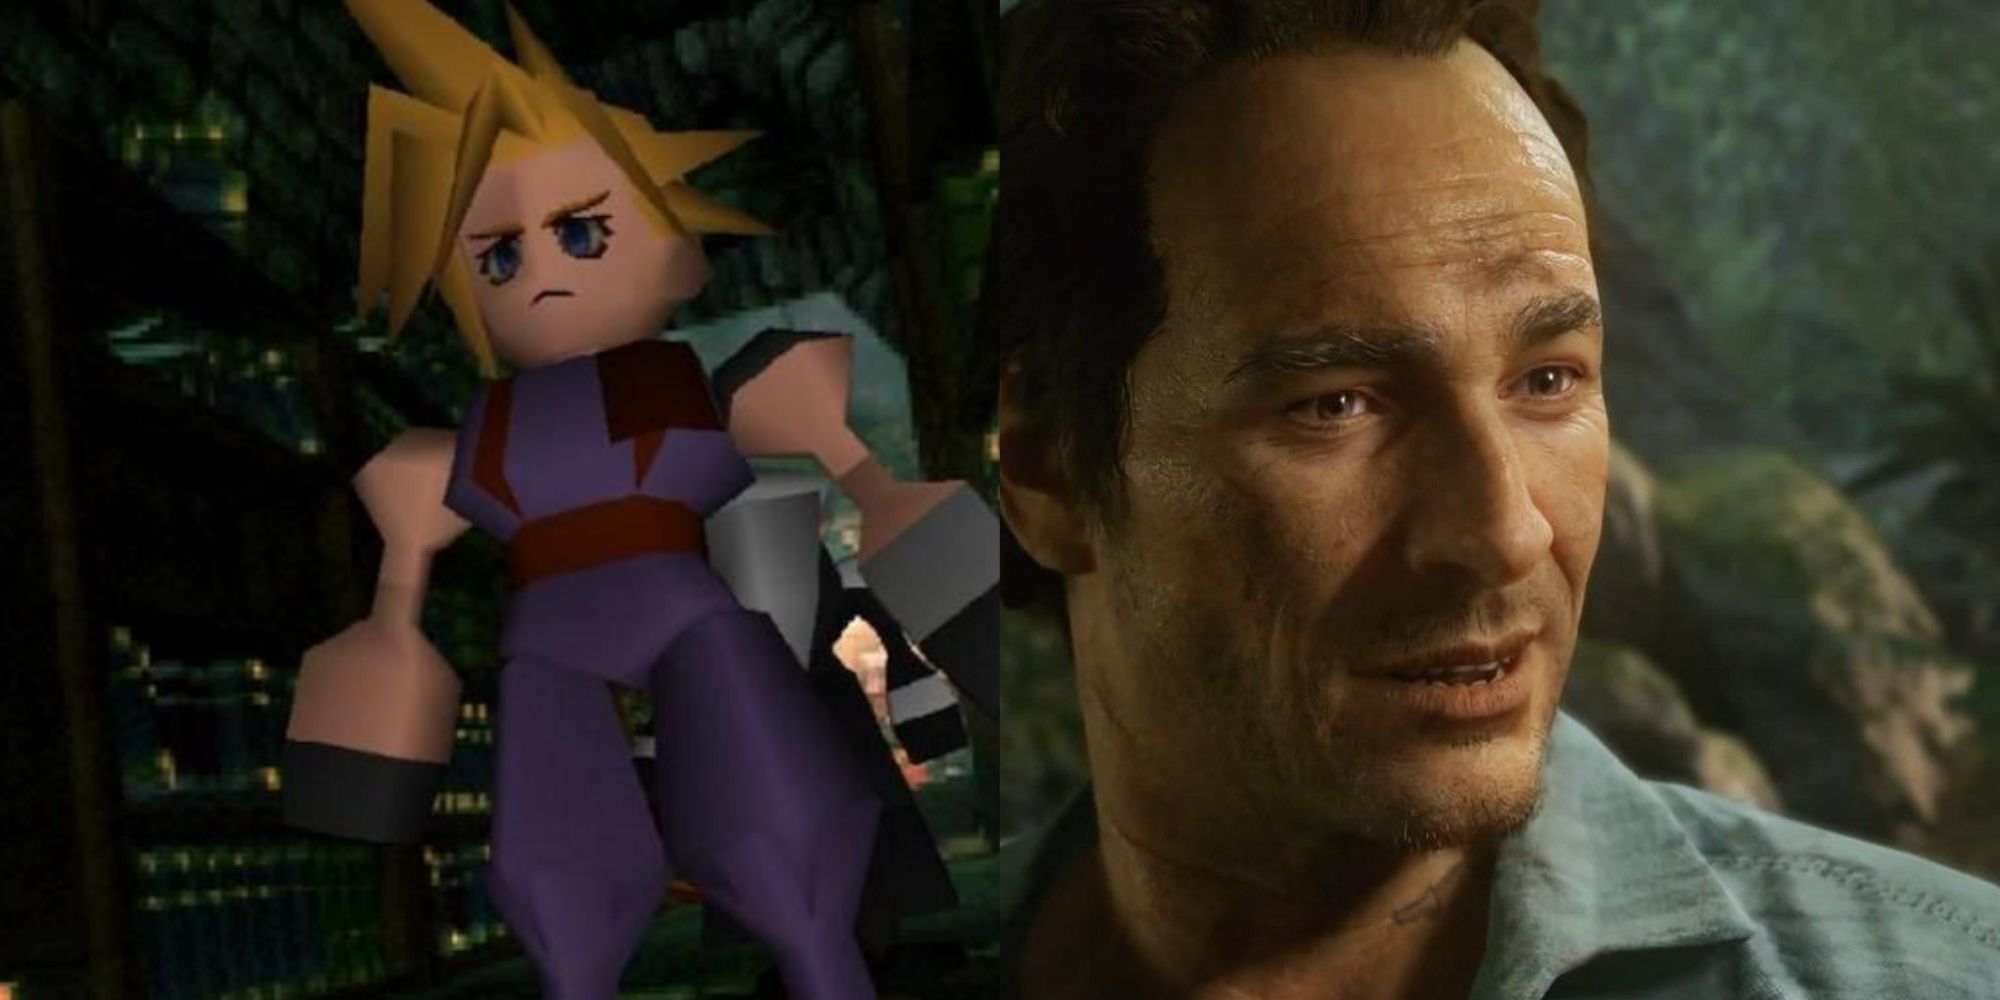 Games With Unreliable Narrators Featured Split Image Final Fantasy Cloud And Uncharted Sam